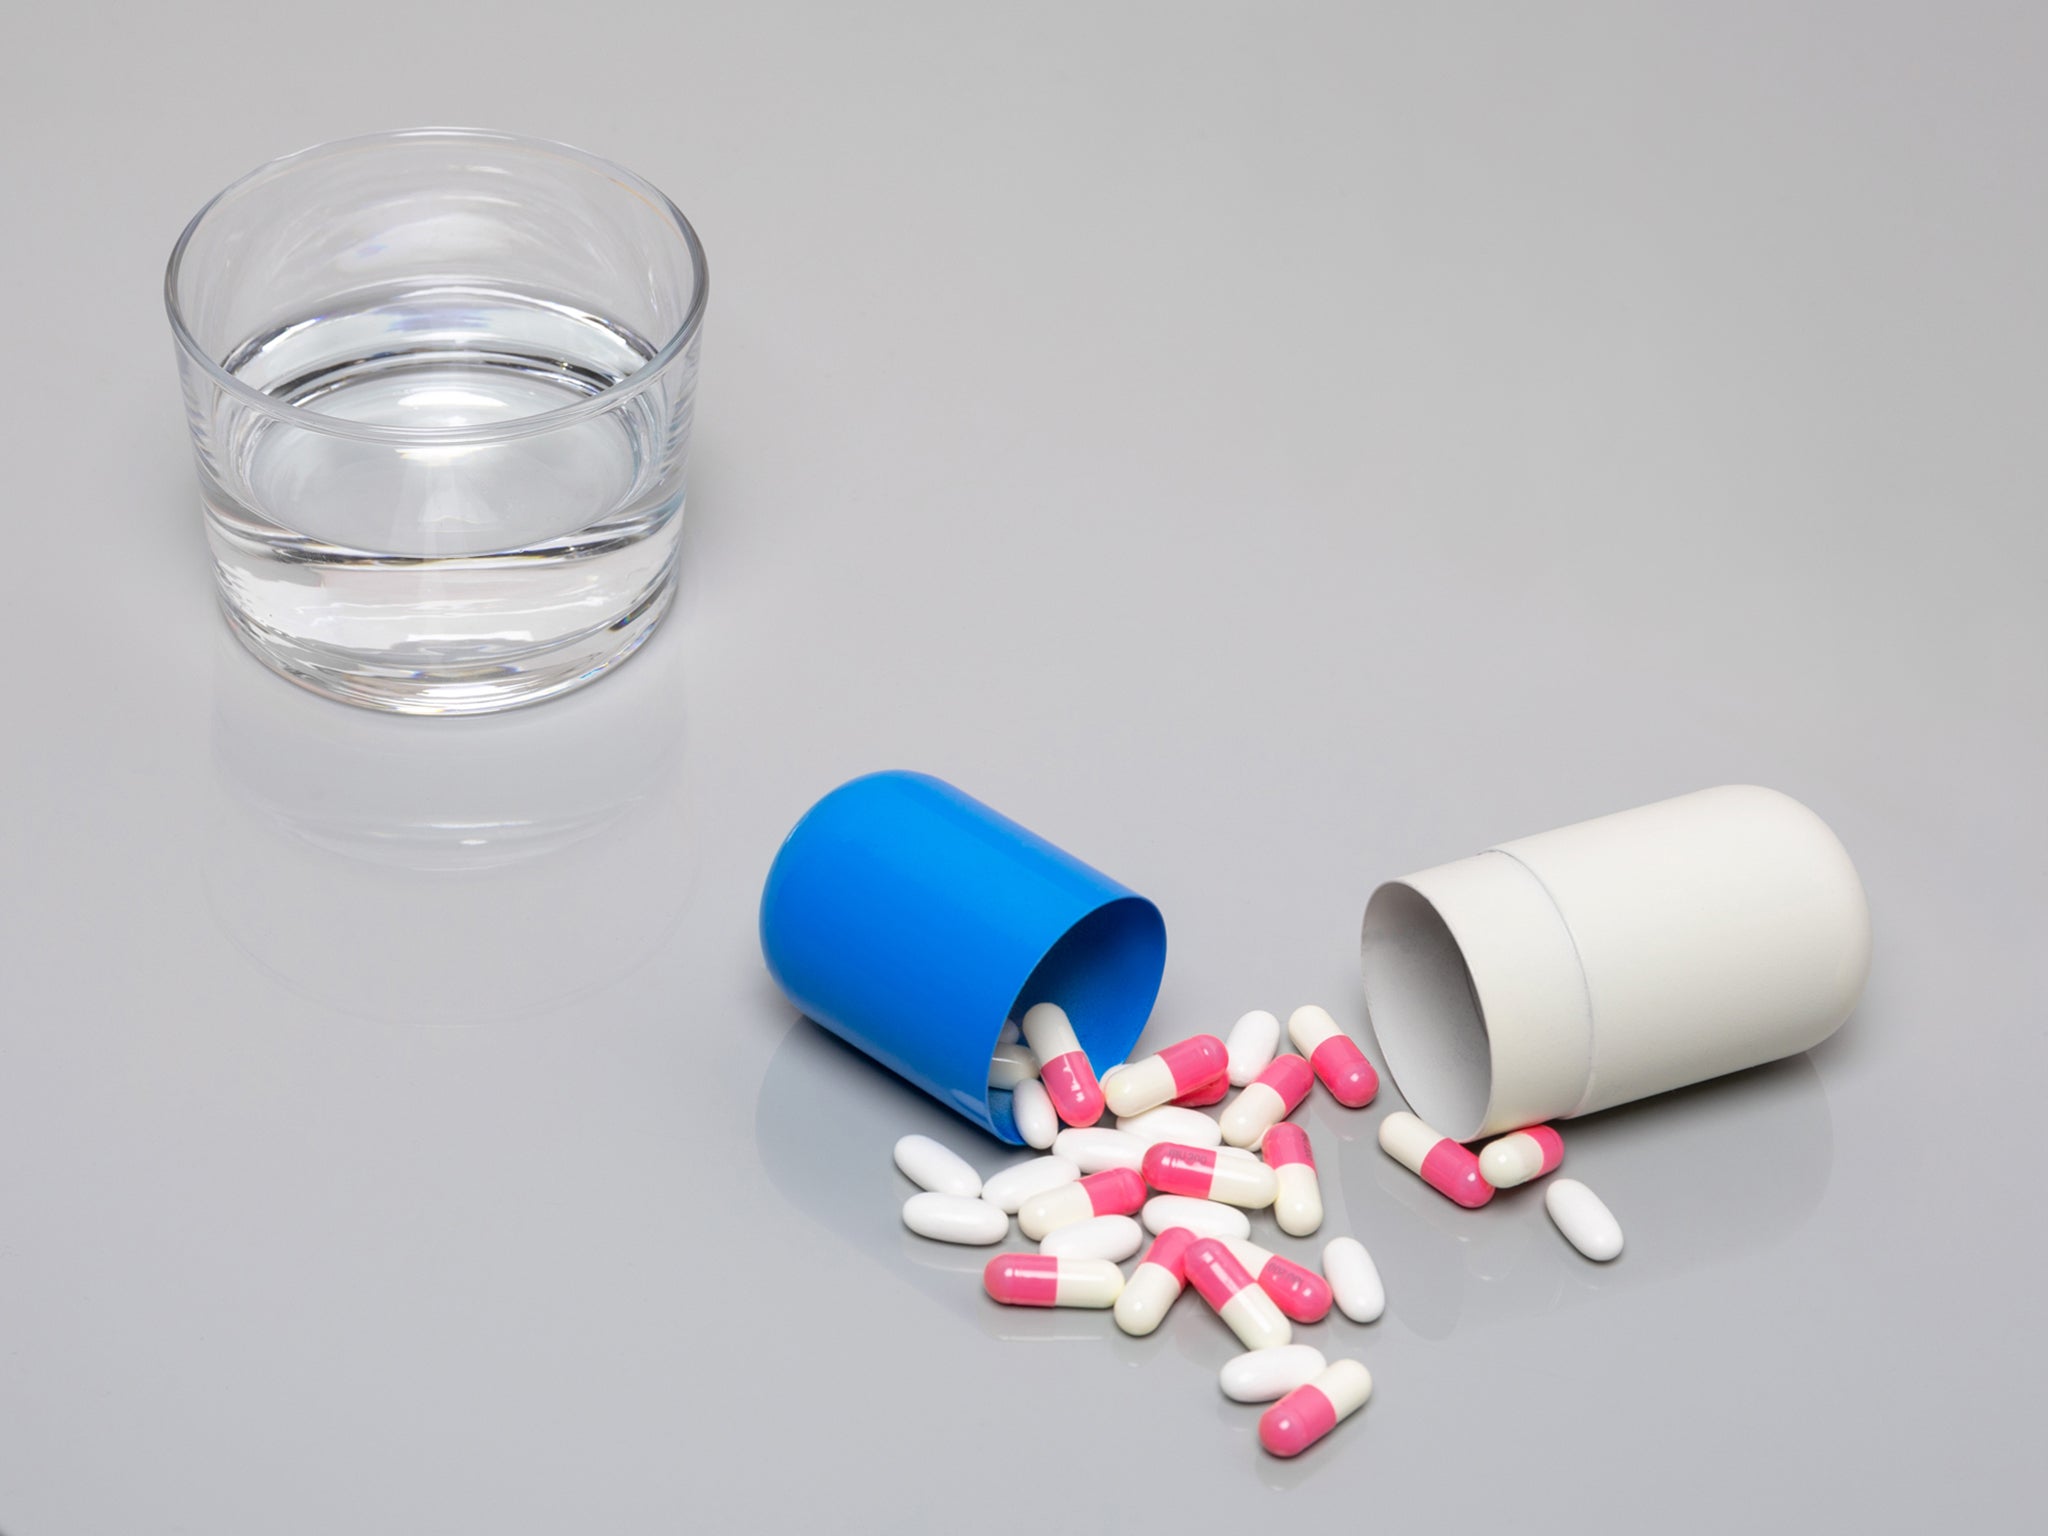 3D-printed pills squeeze in more of the active ingredients than standard ones (John Gribben )